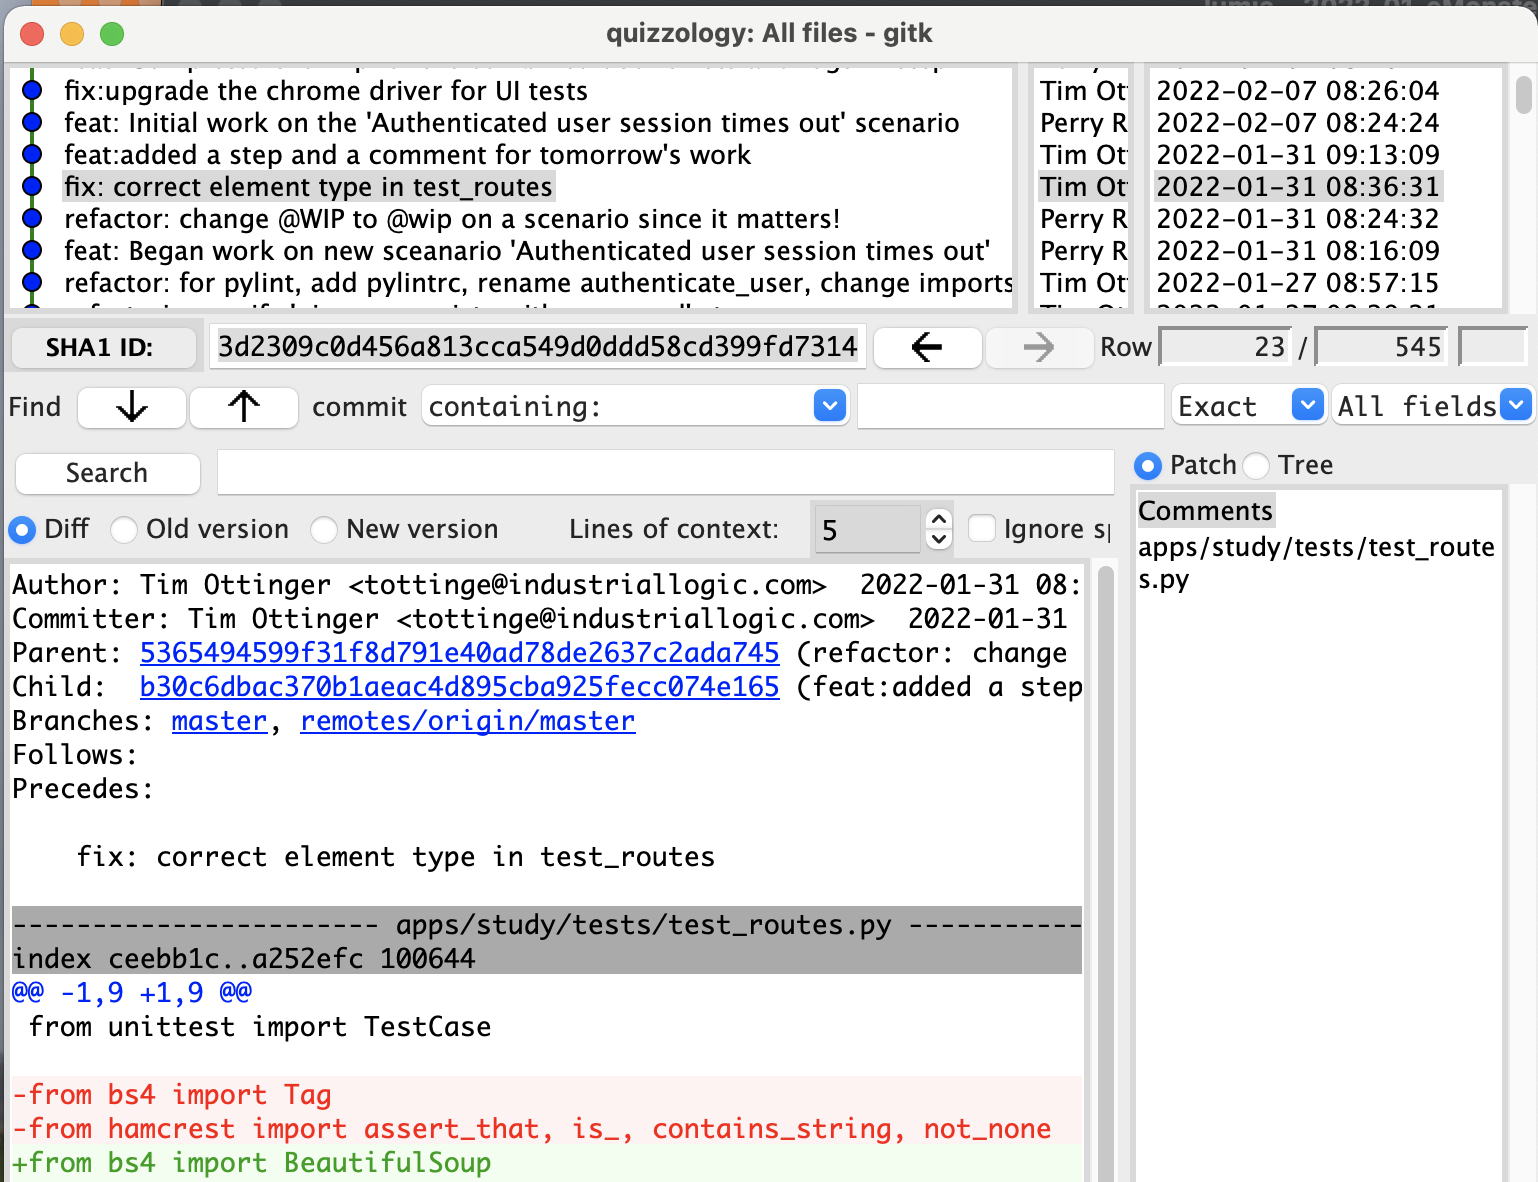 image of gitk tool showing commits